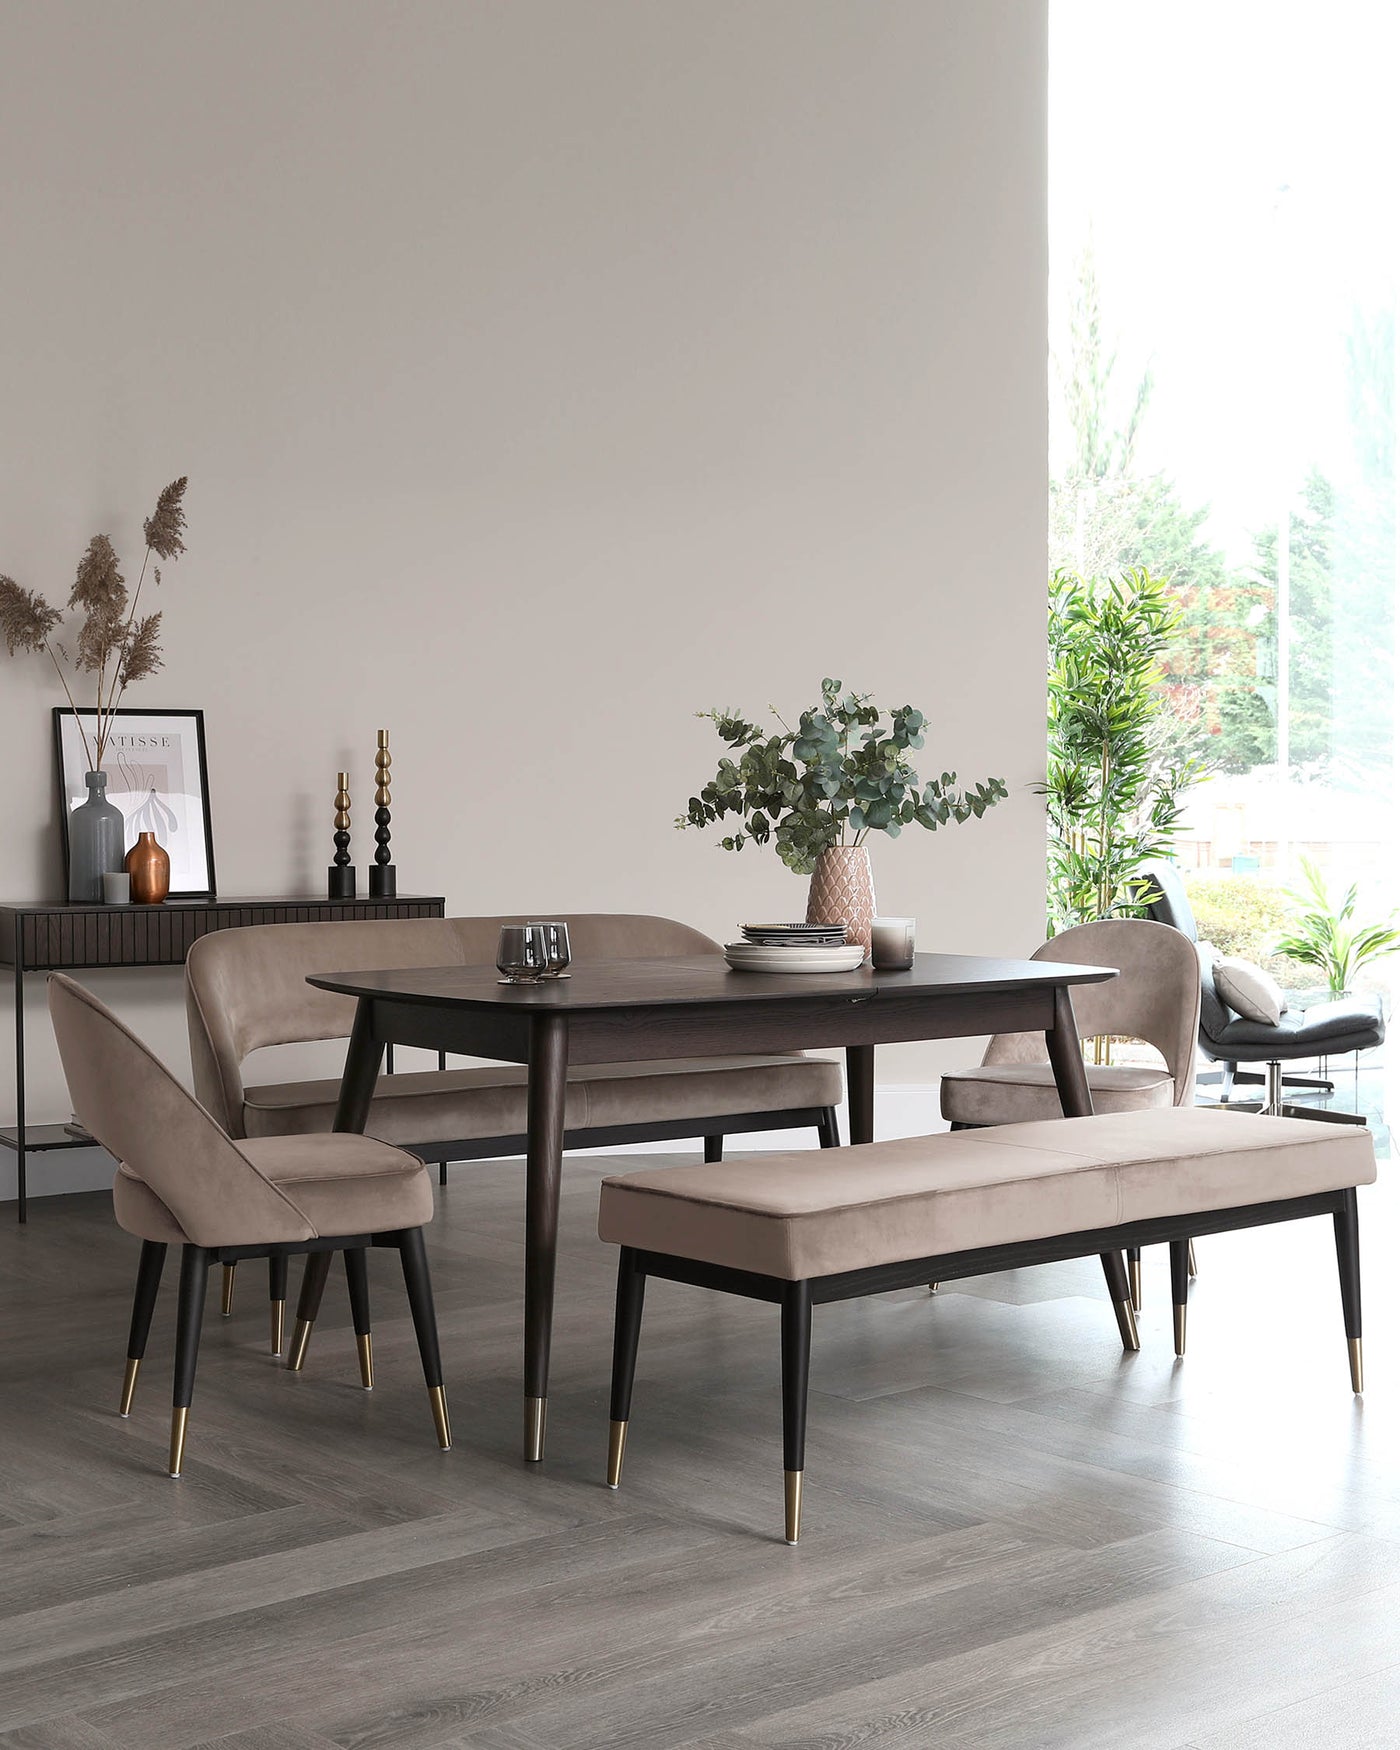 Contemporary dining room featuring a dark wooden table with a smooth finish, flanked by elegant taupe upholstered chairs with black legs tipped with gold accents. A matching bench with the same fabric and design completes the set. A sleek sideboard in the background ties together the modern aesthetic.